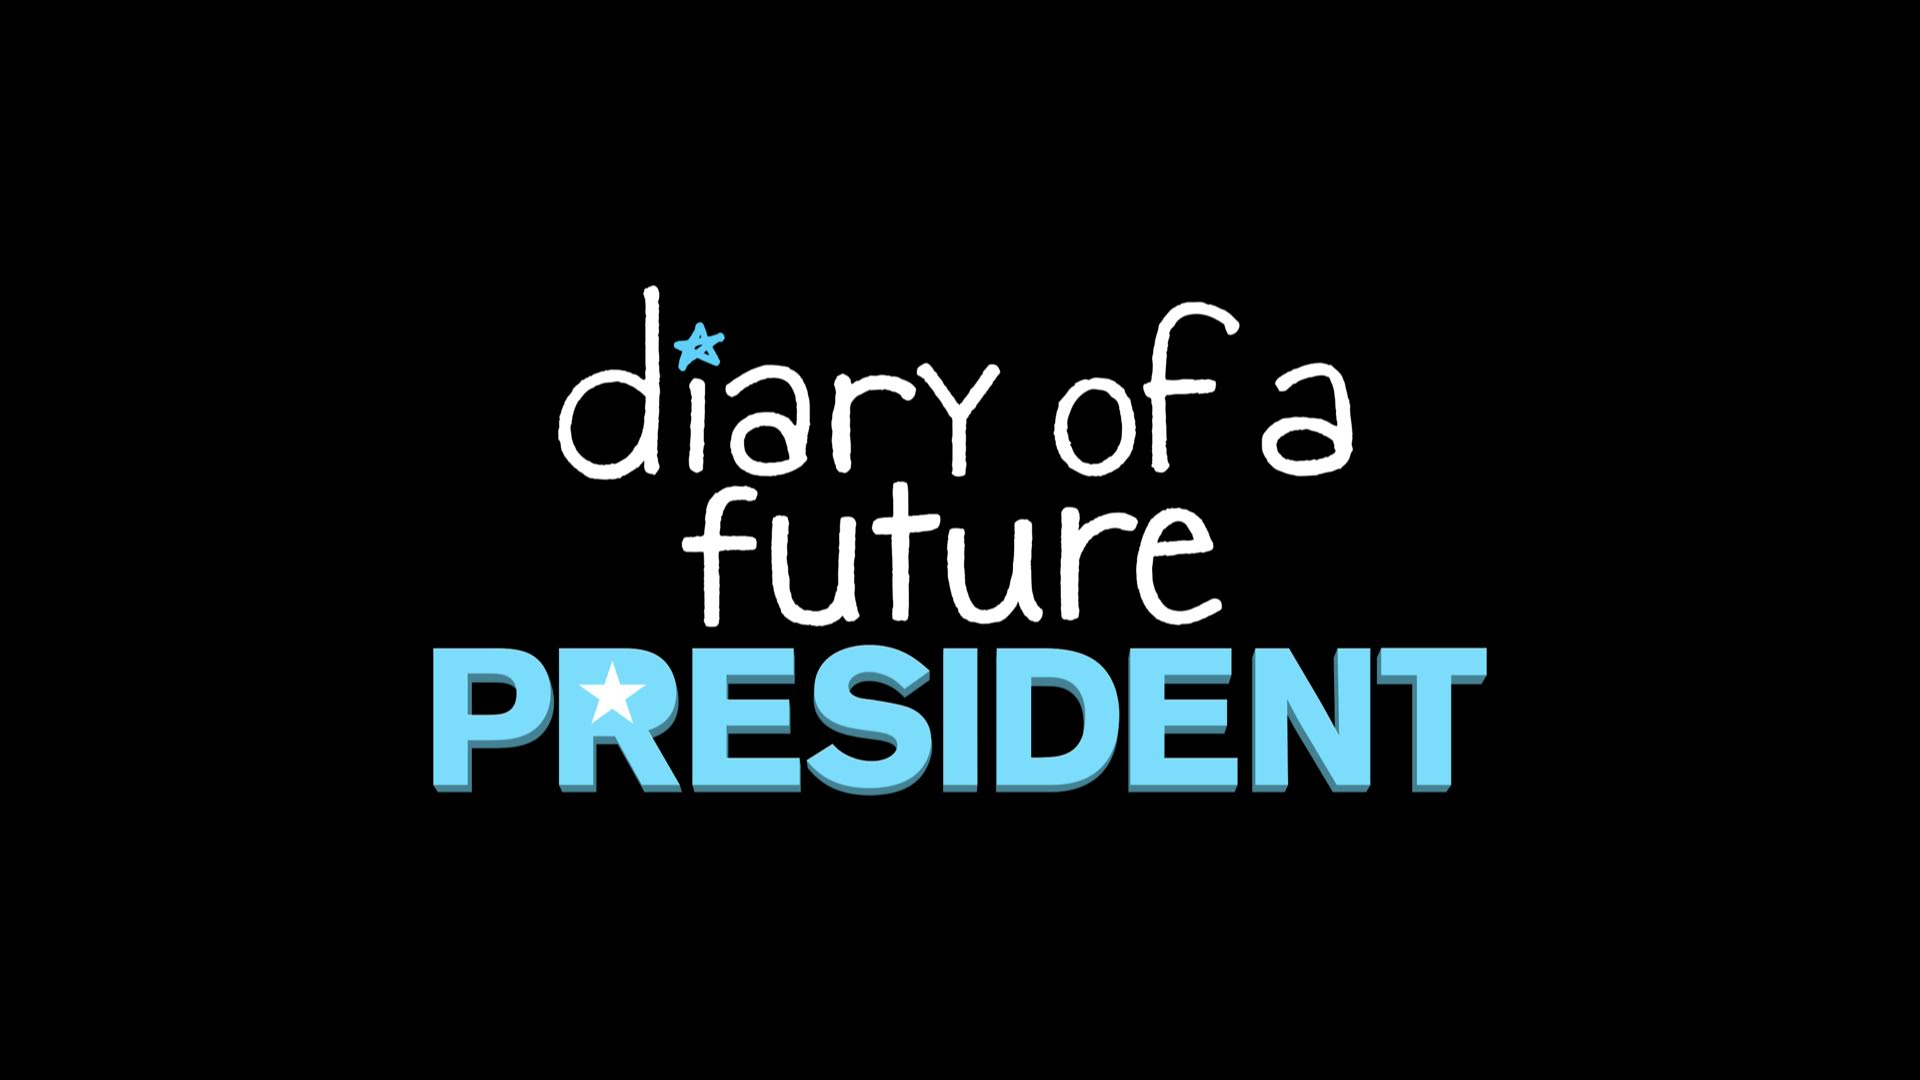 New Disney+ Series ‘Diary of a Future President’ Arriving in January 2020